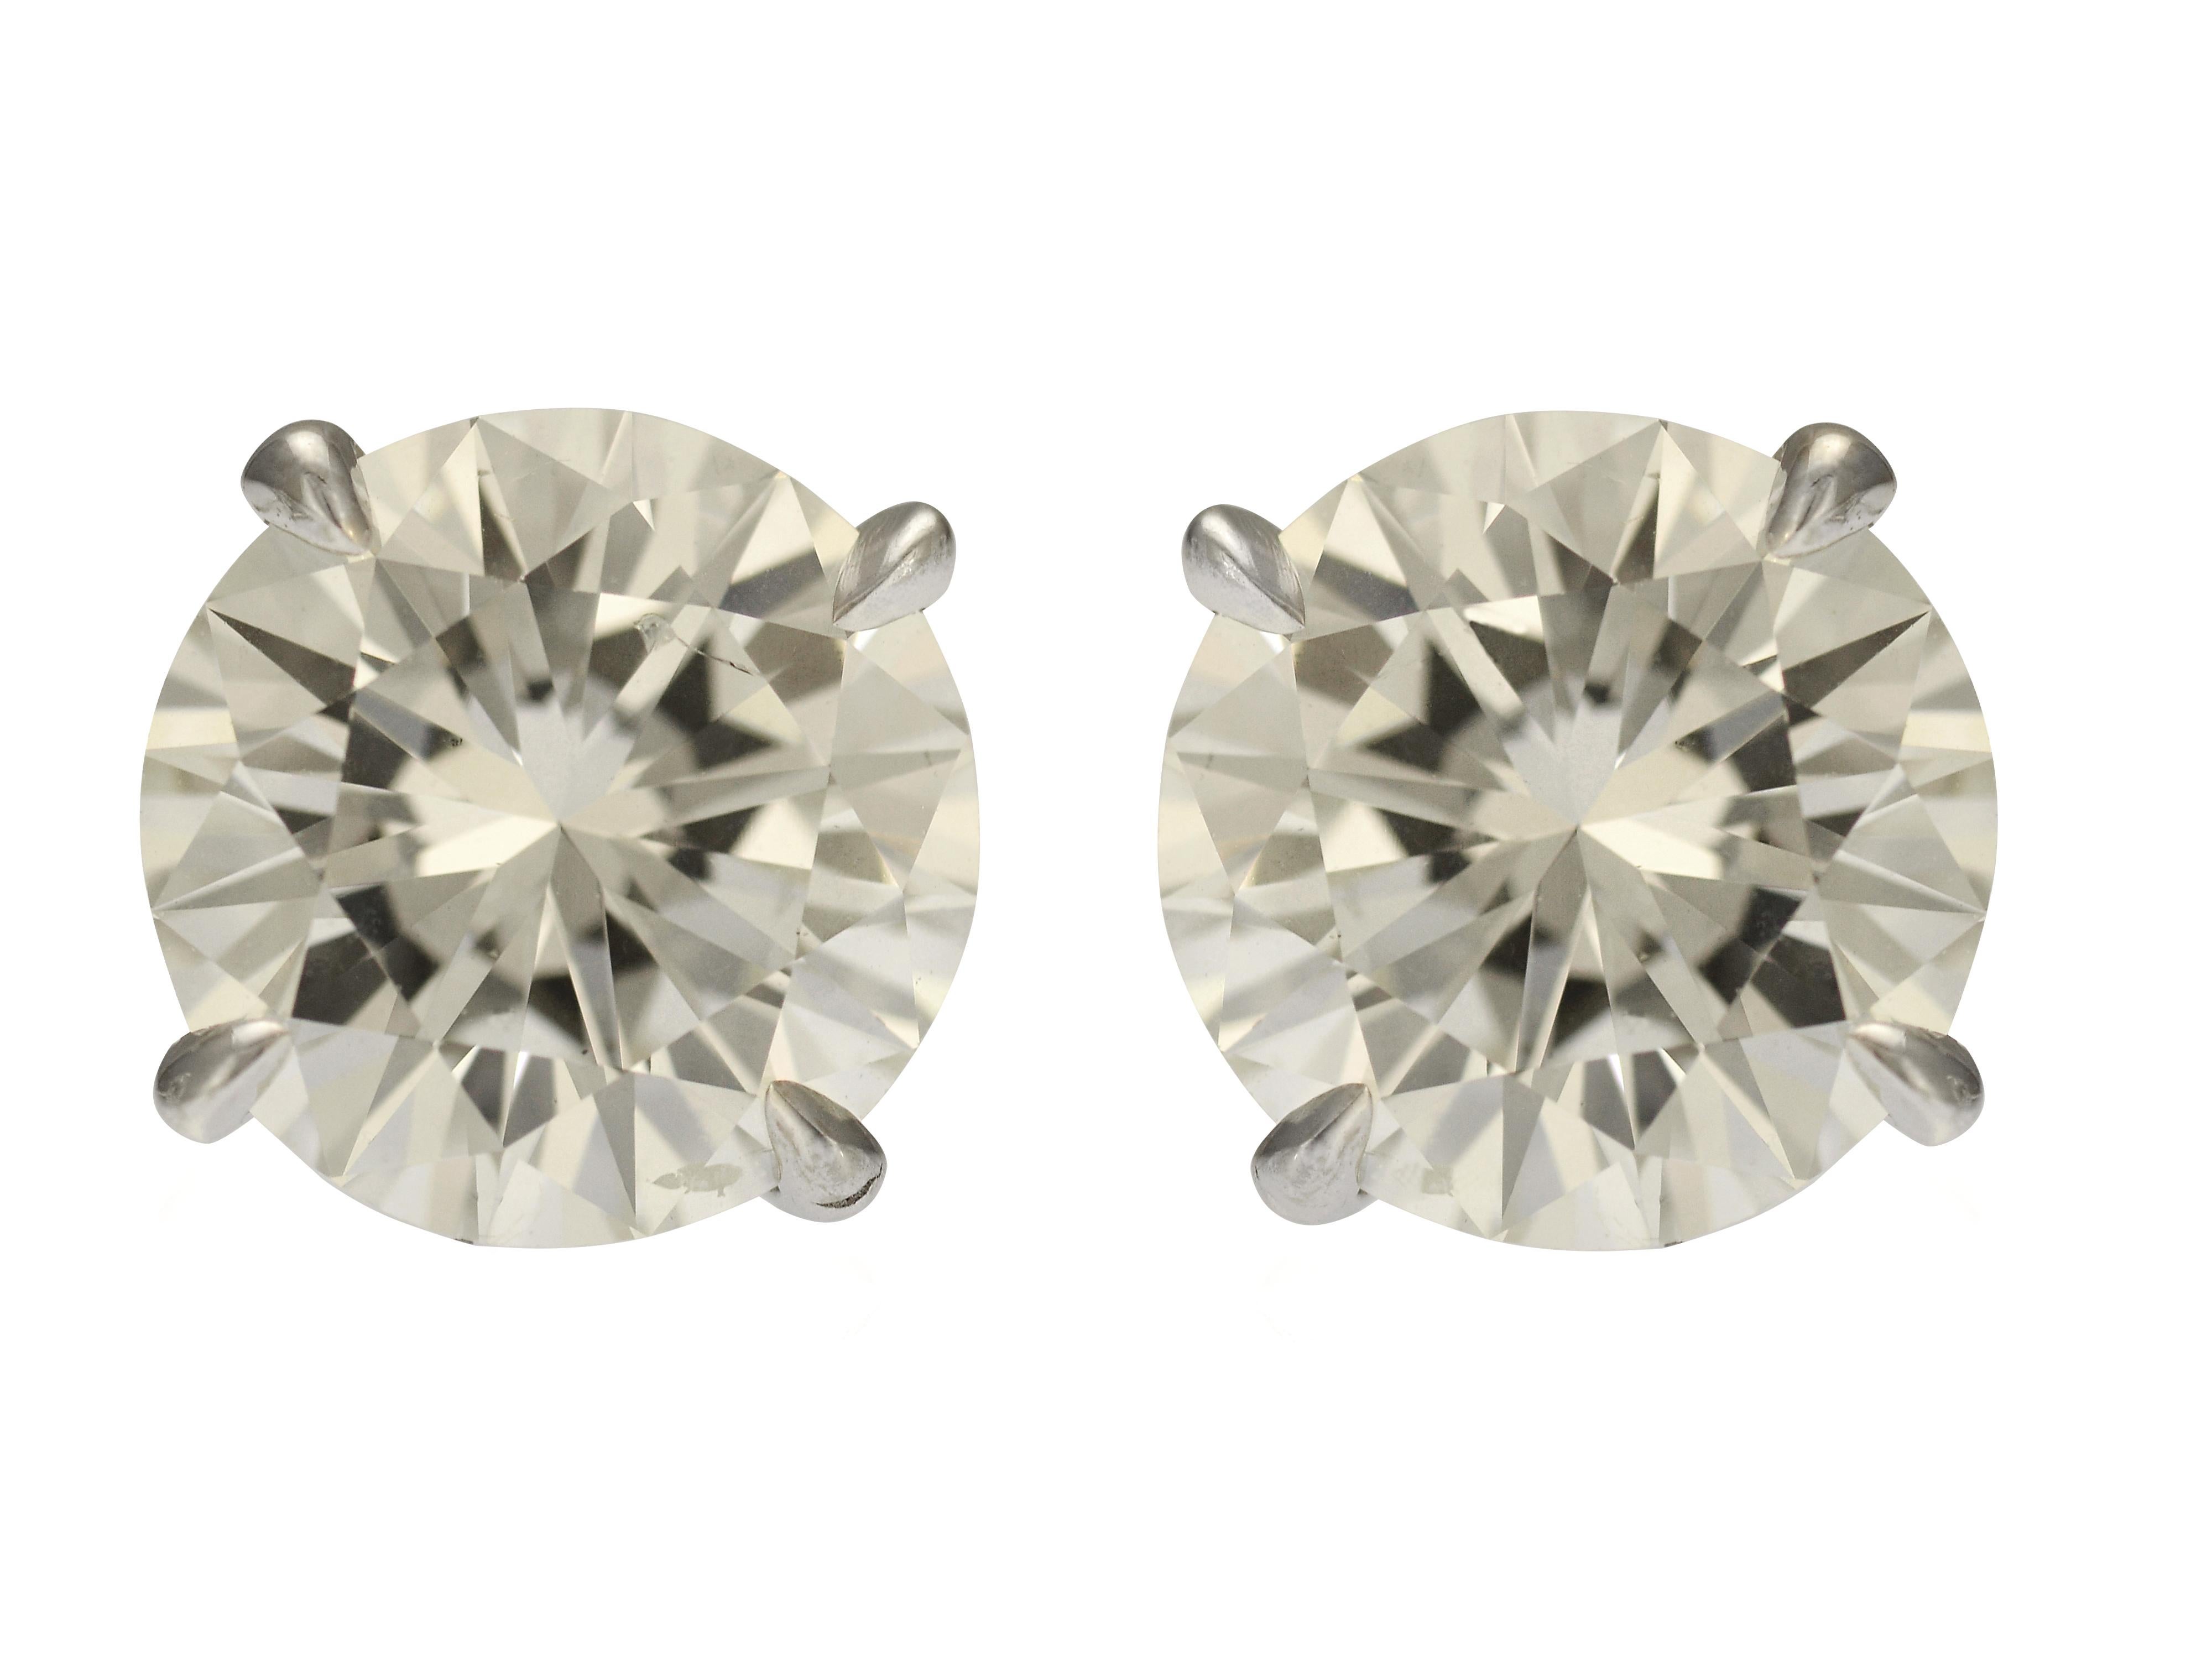 This pair of matched diamond stud earrings are crafted in 14 karat white gold with 4 prong baskets. The 2 round brilliant cut GIA graded diamonds are 1.57 carat SI1 clarity with G color, and 1.62 carat SI2 clarity with H color respectively, with a